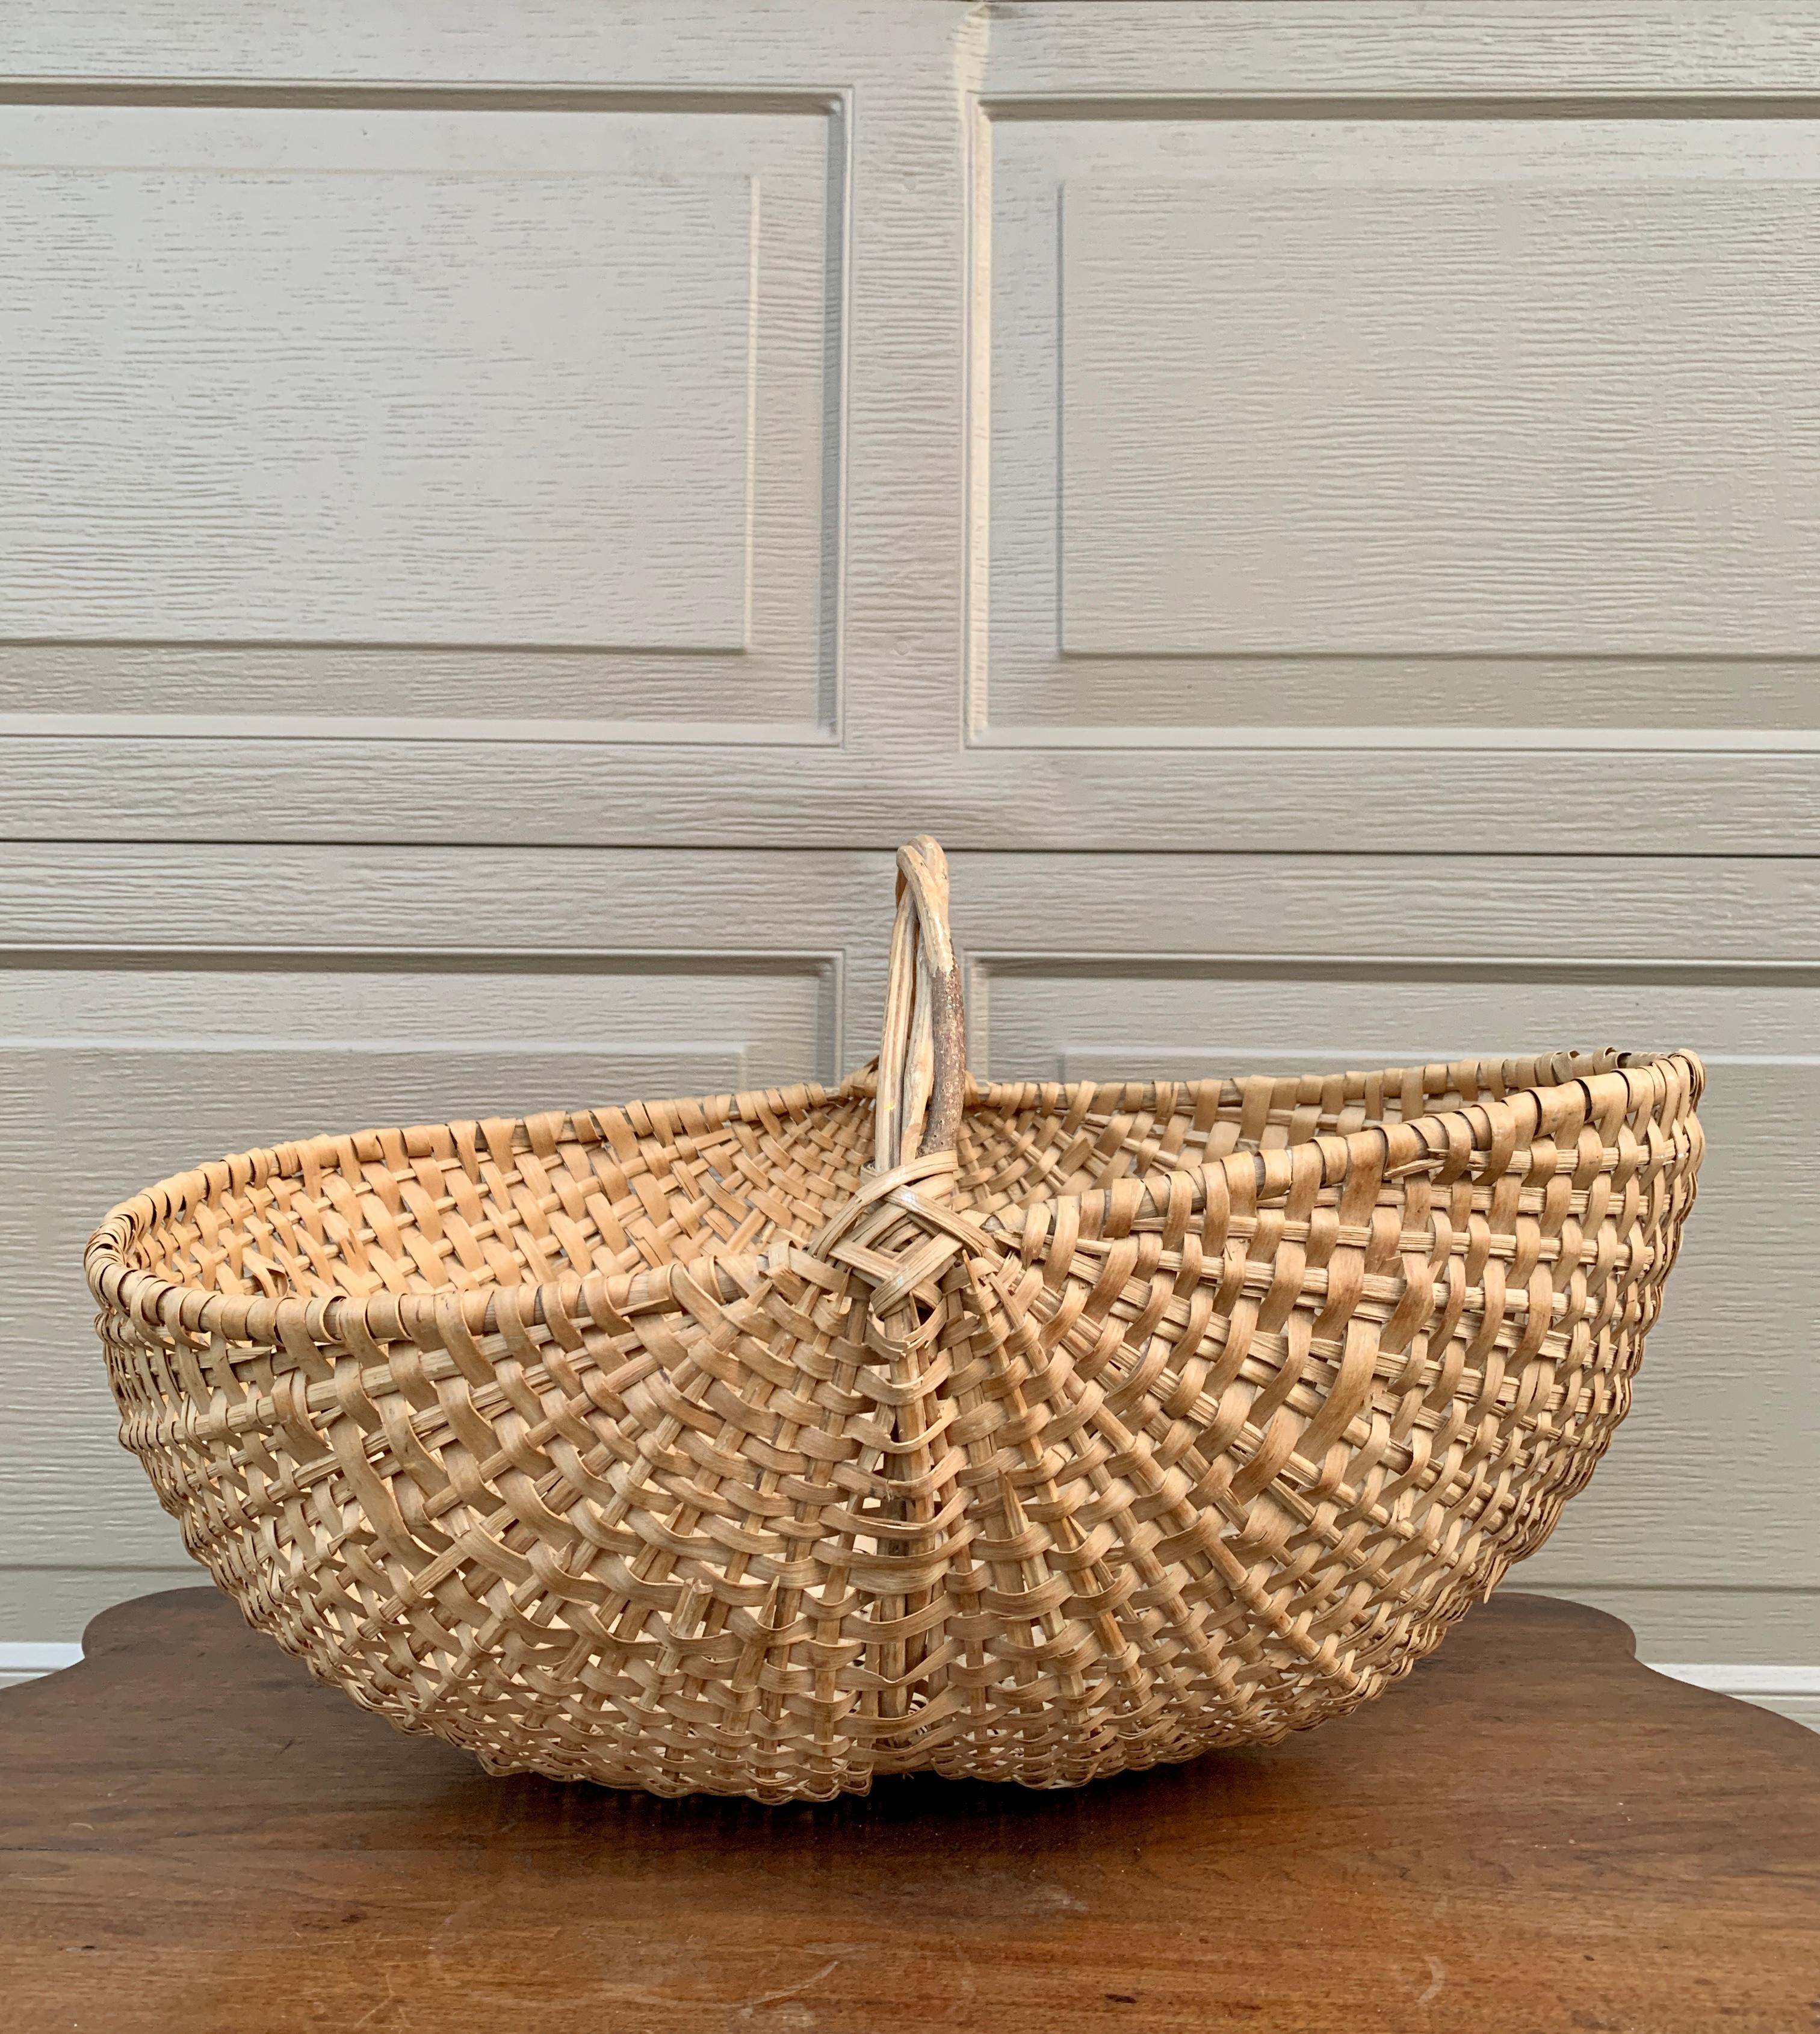 A large American splint oak gathering basket with woven twig handle. The charming basket has a tight weave and would be charming as a decorative or functional piece.

USA, Early 20th Century

Measures: 22.75